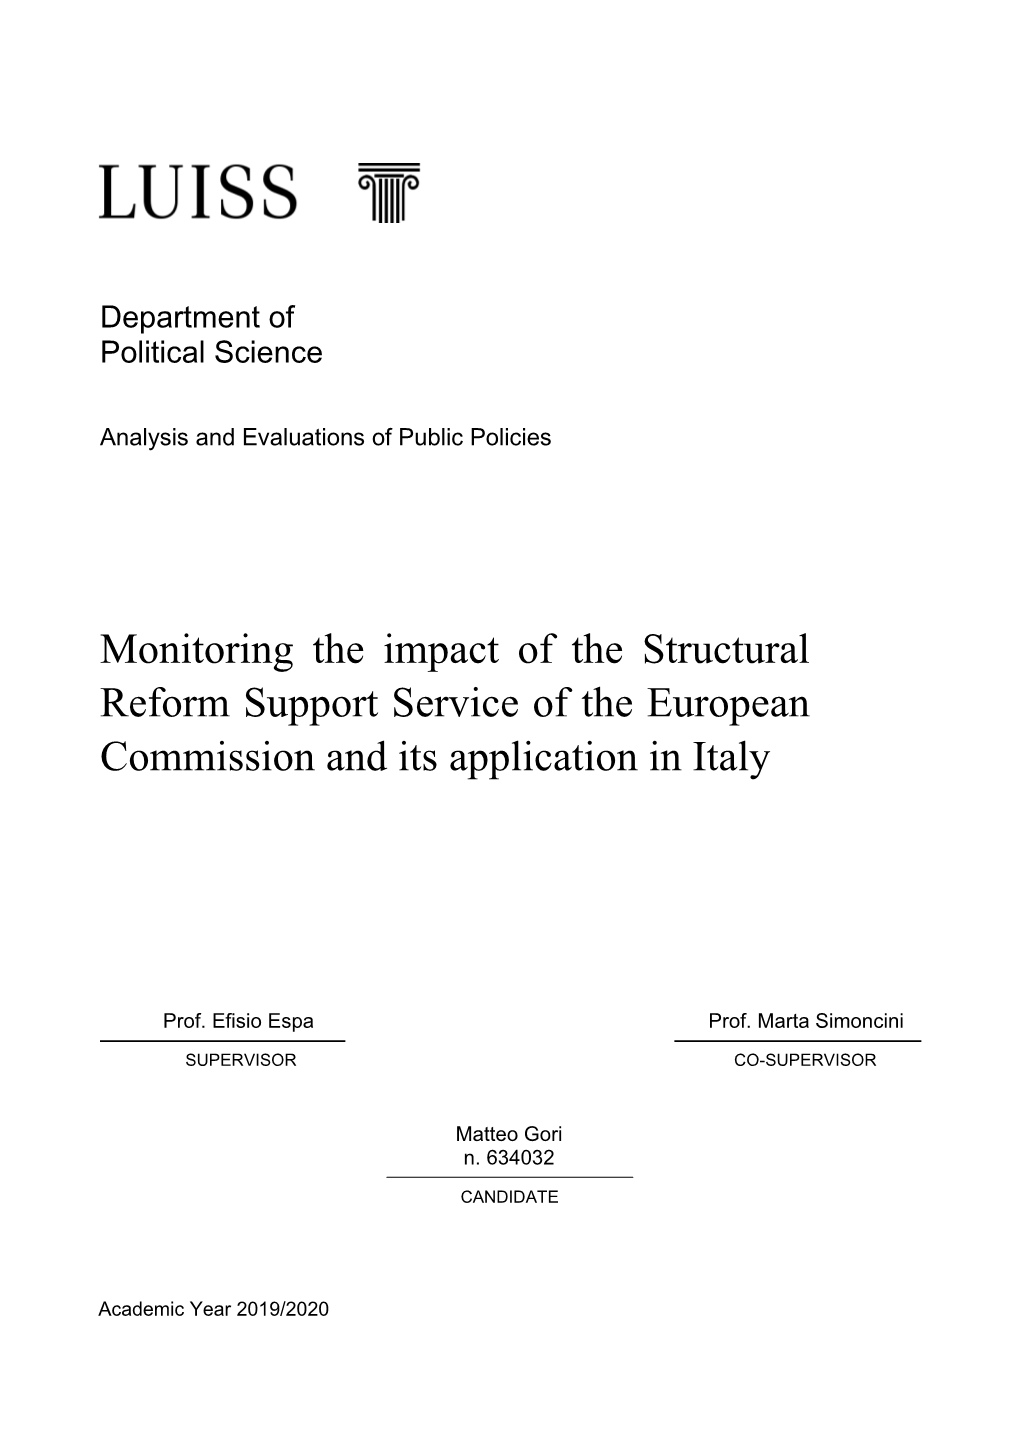 Monitoring the Impact of the Structural Reform Support Service of the European Commission and Its Application in Italy